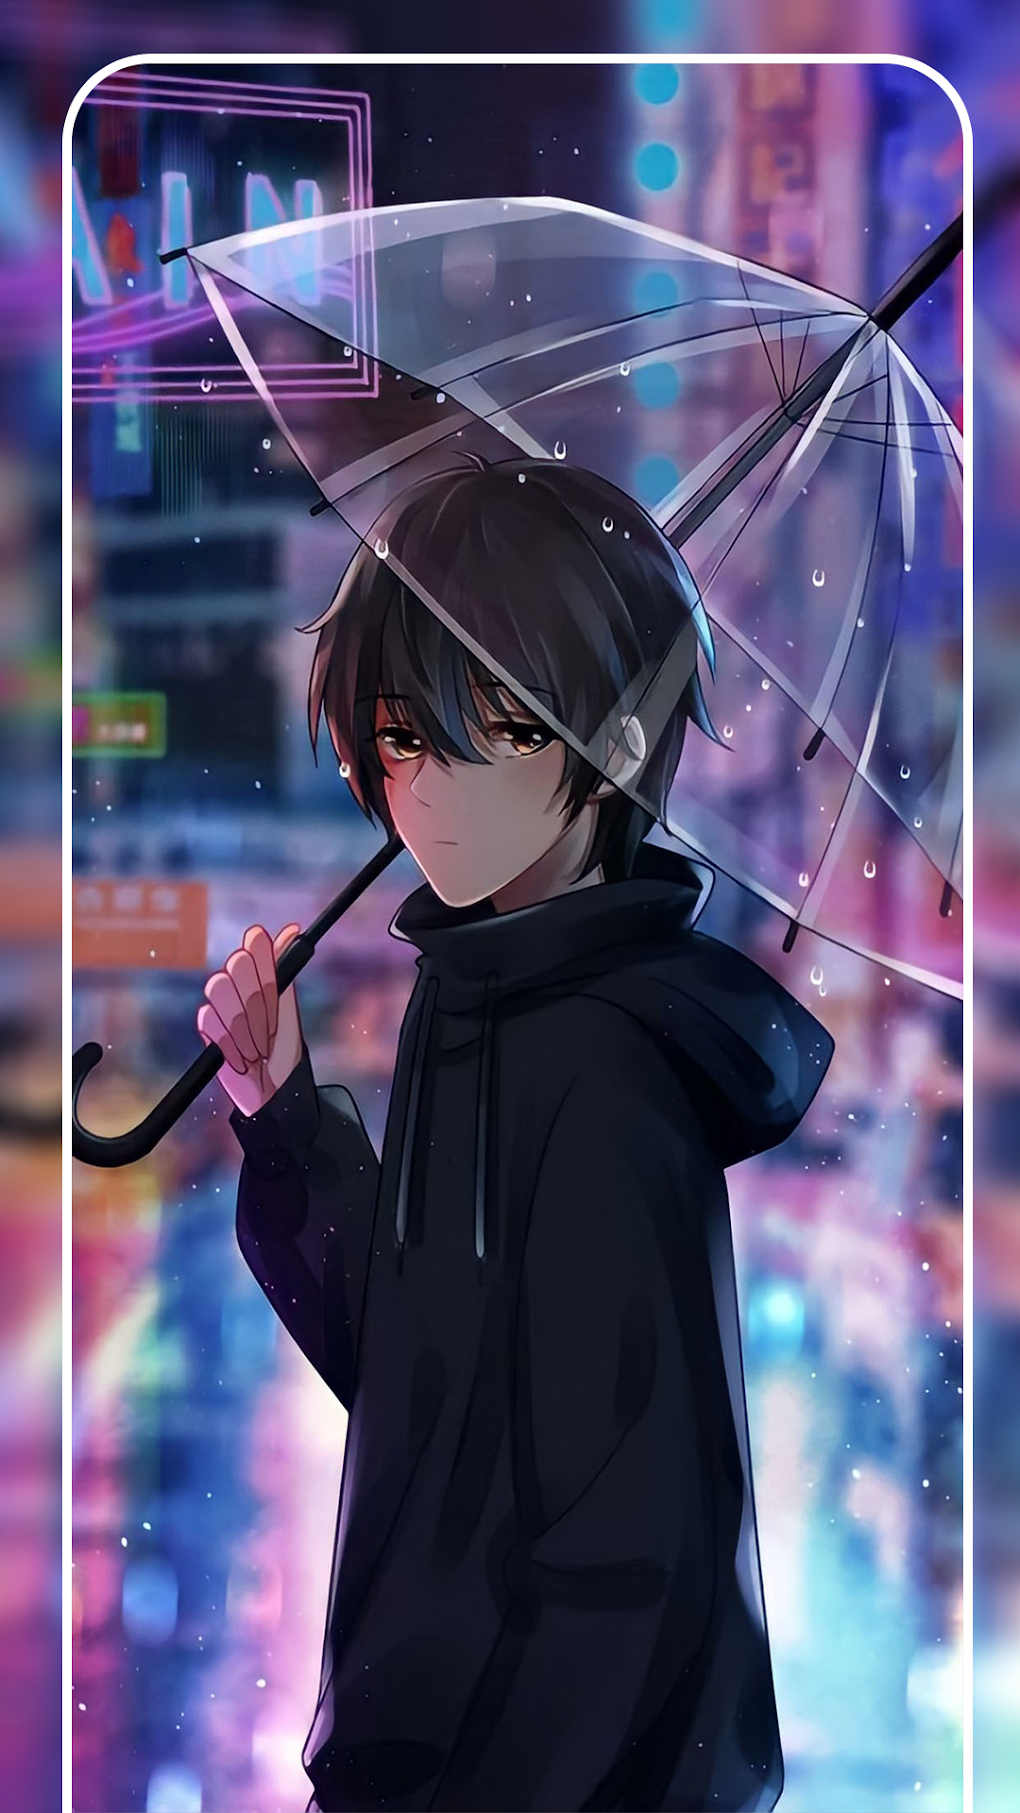 Anime illustration of a lonely and sad boy, cool ton...